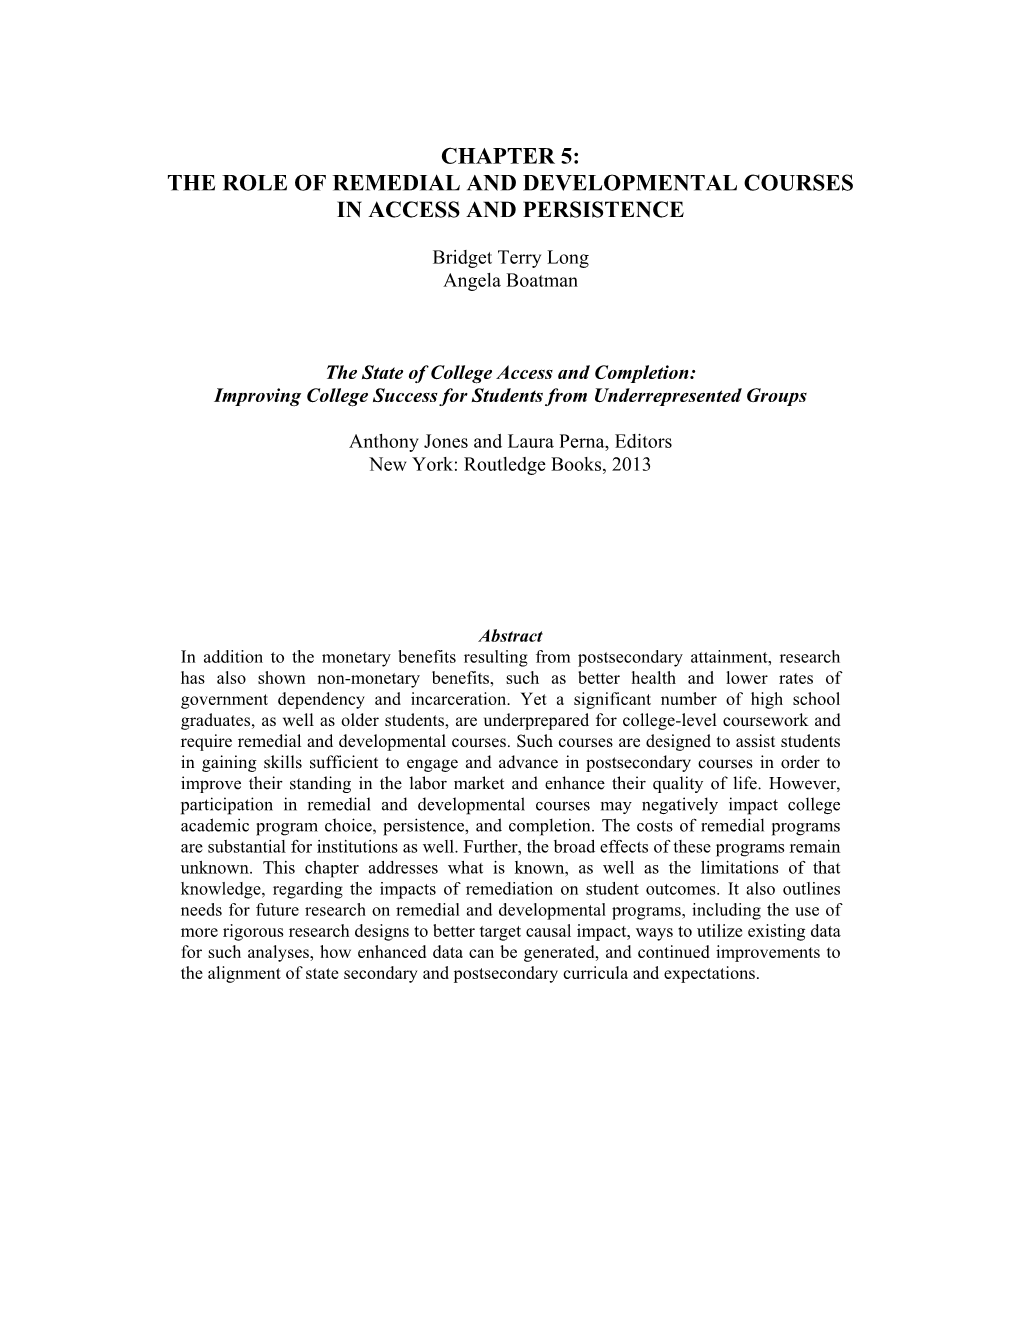 Chapter 5: the Role of Remedial and Developmental Courses in Access and Persistence